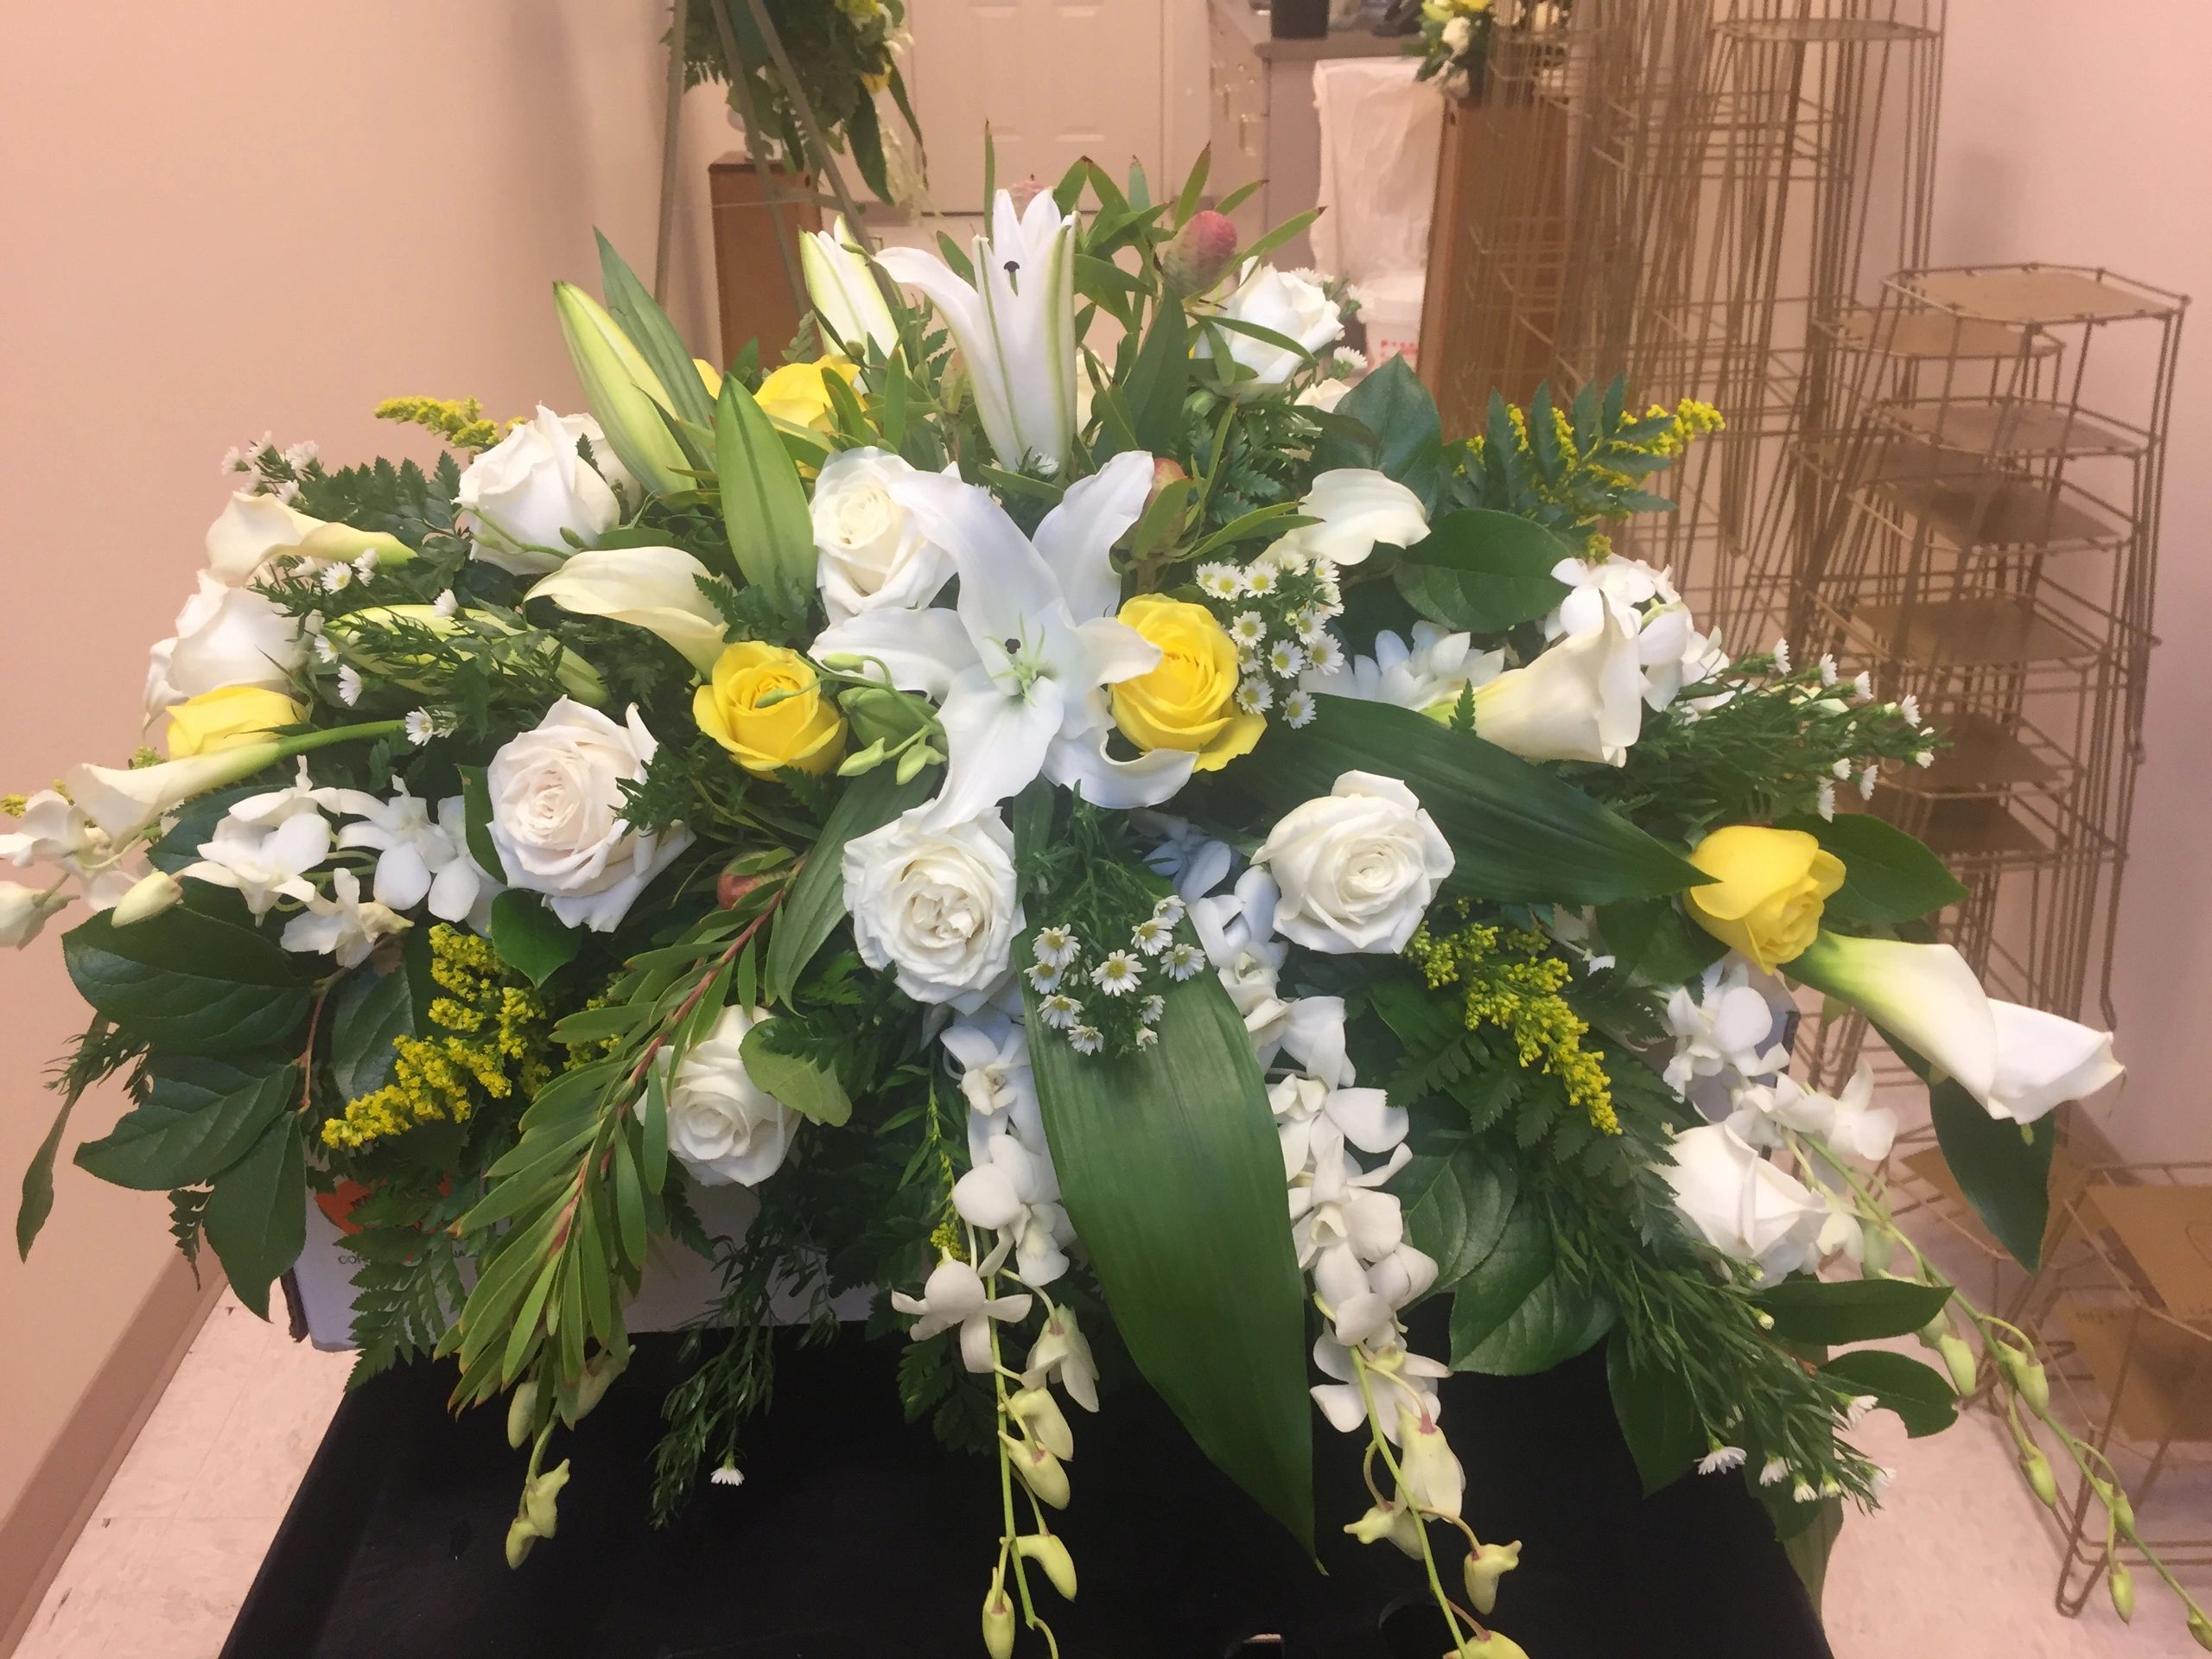 White and yellow roses with greenery